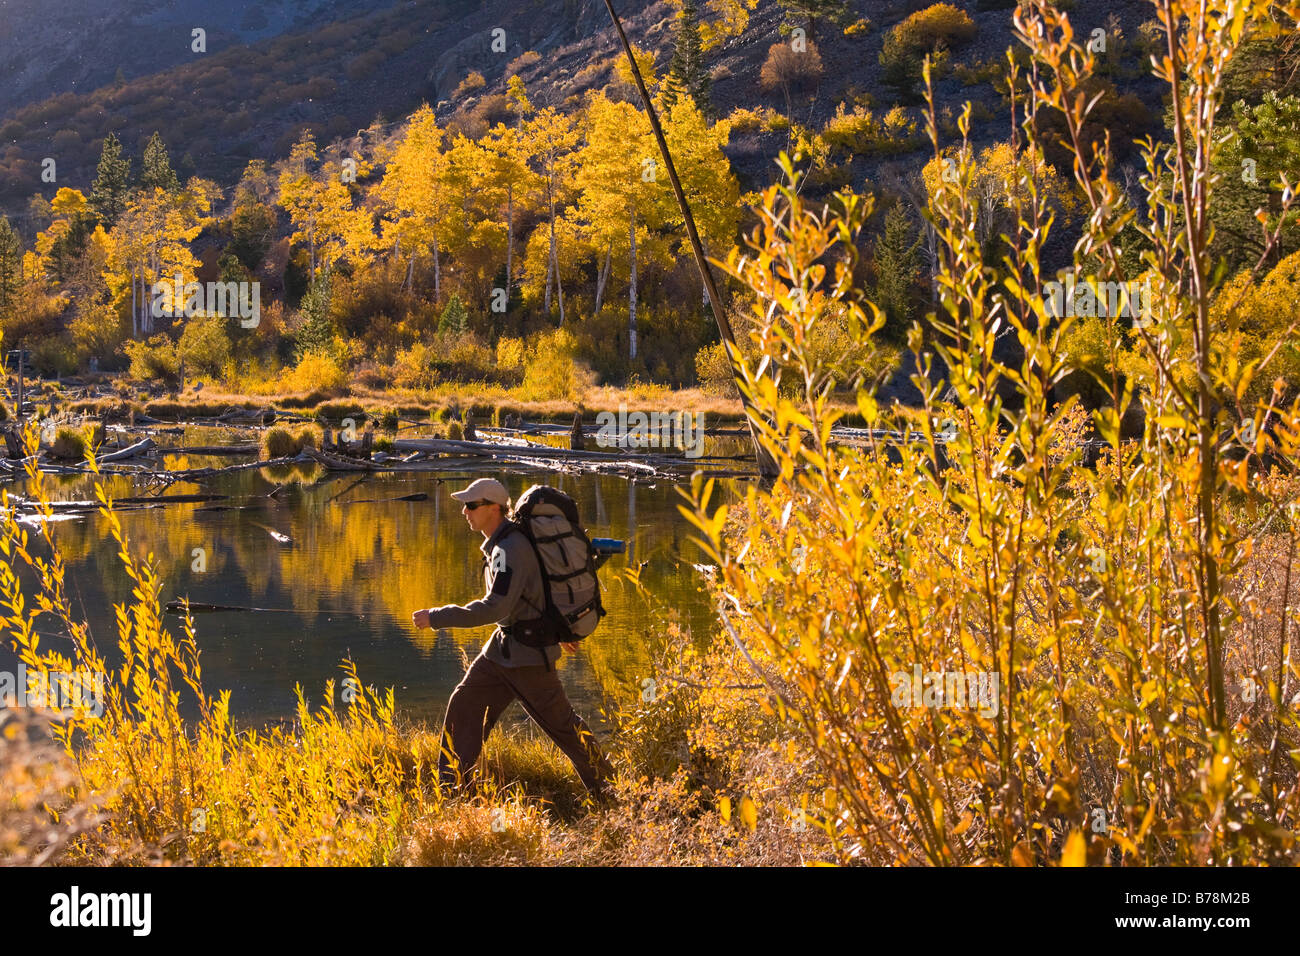 A man hiking in the mountains by a pond and yellow aspen trees in the fall in Lundy Canyon California Stock Photo